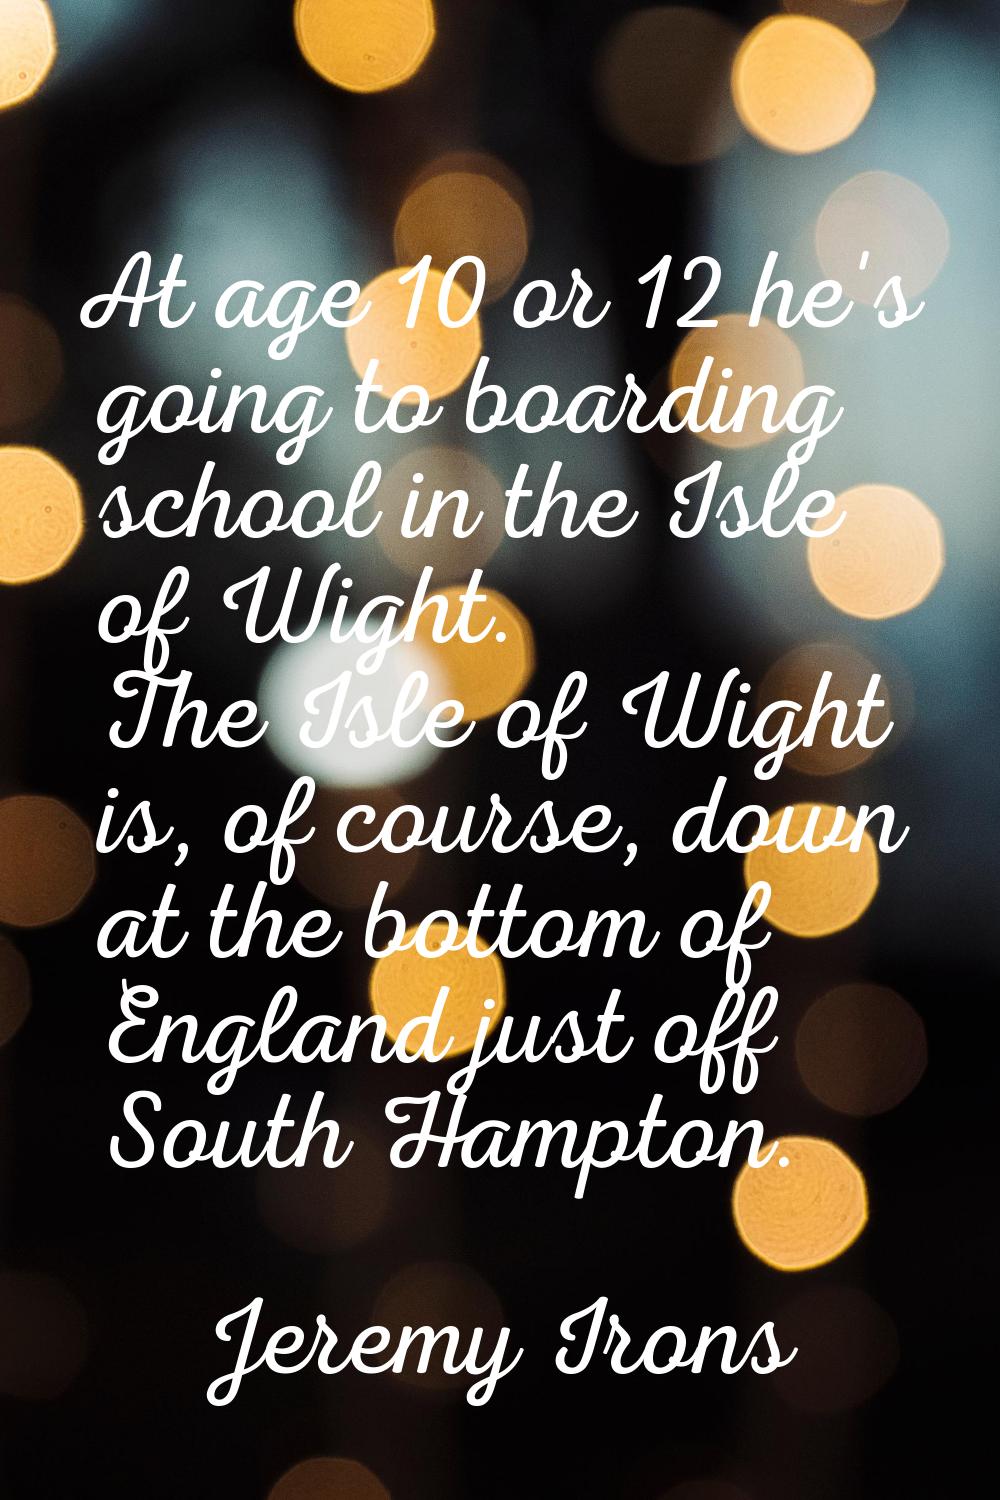 At age 10 or 12 he's going to boarding school in the Isle of Wight. The Isle of Wight is, of course